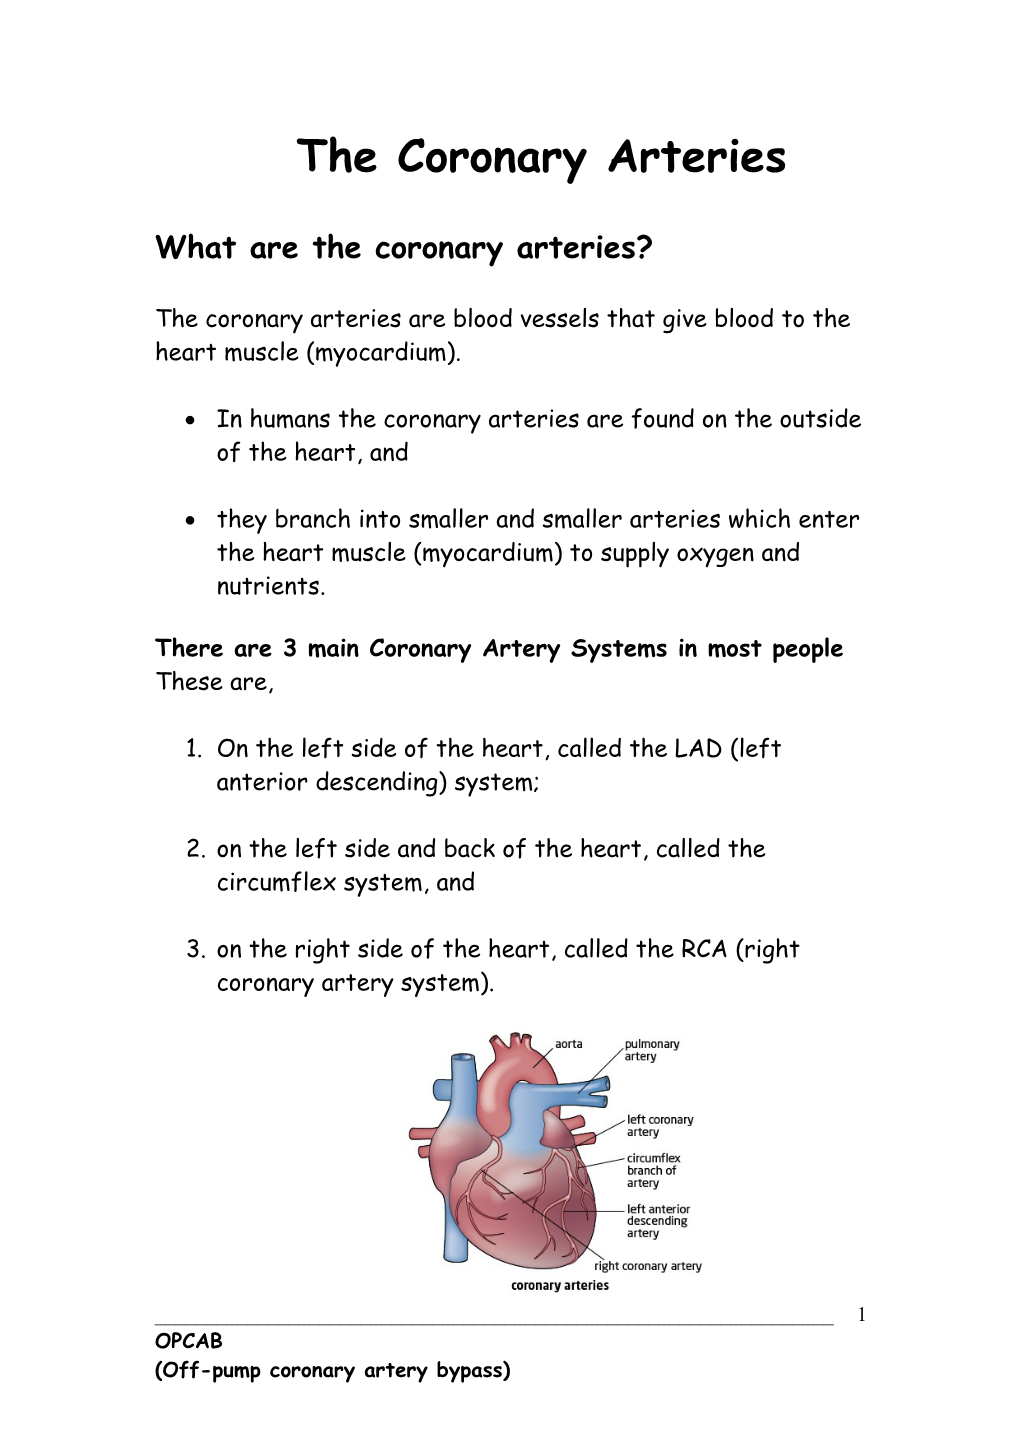 What Are the Coronary Arteries?